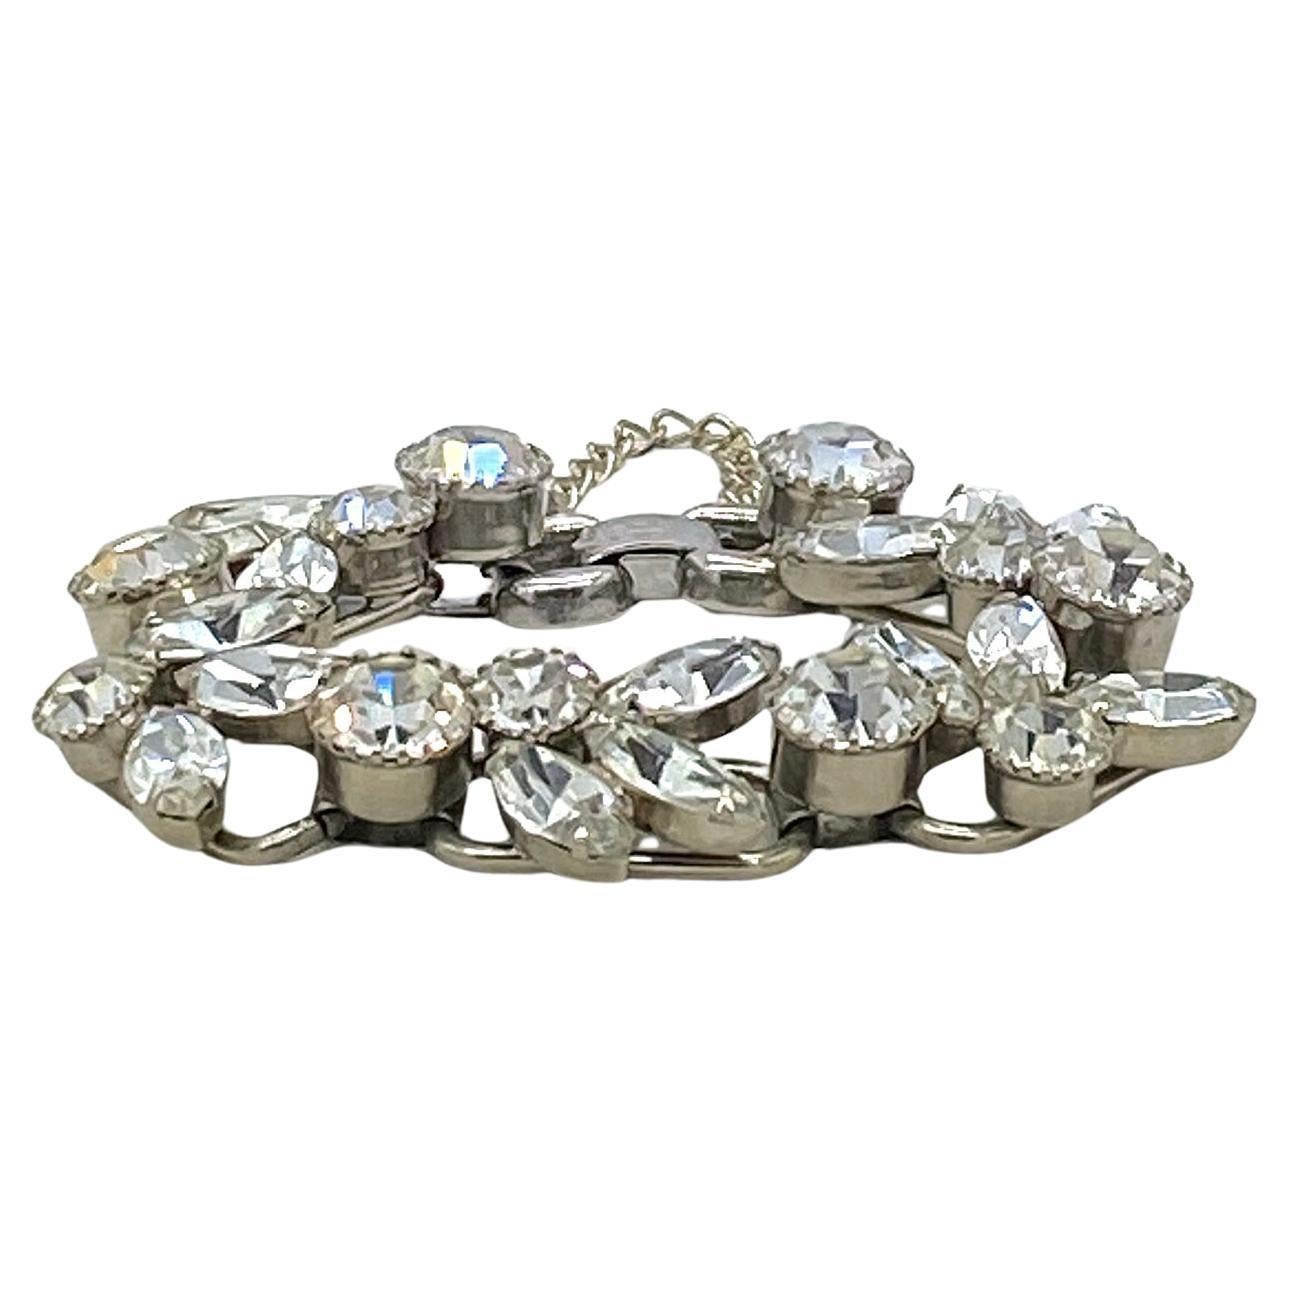 This is an identified Juliana D&E clear rhinestone bracelet. The five chaton and navette stones cluster segments are prong-set on rhodium-plated linked rings (5 ring links are their bracelet typical construction) with a security chain. This vintage